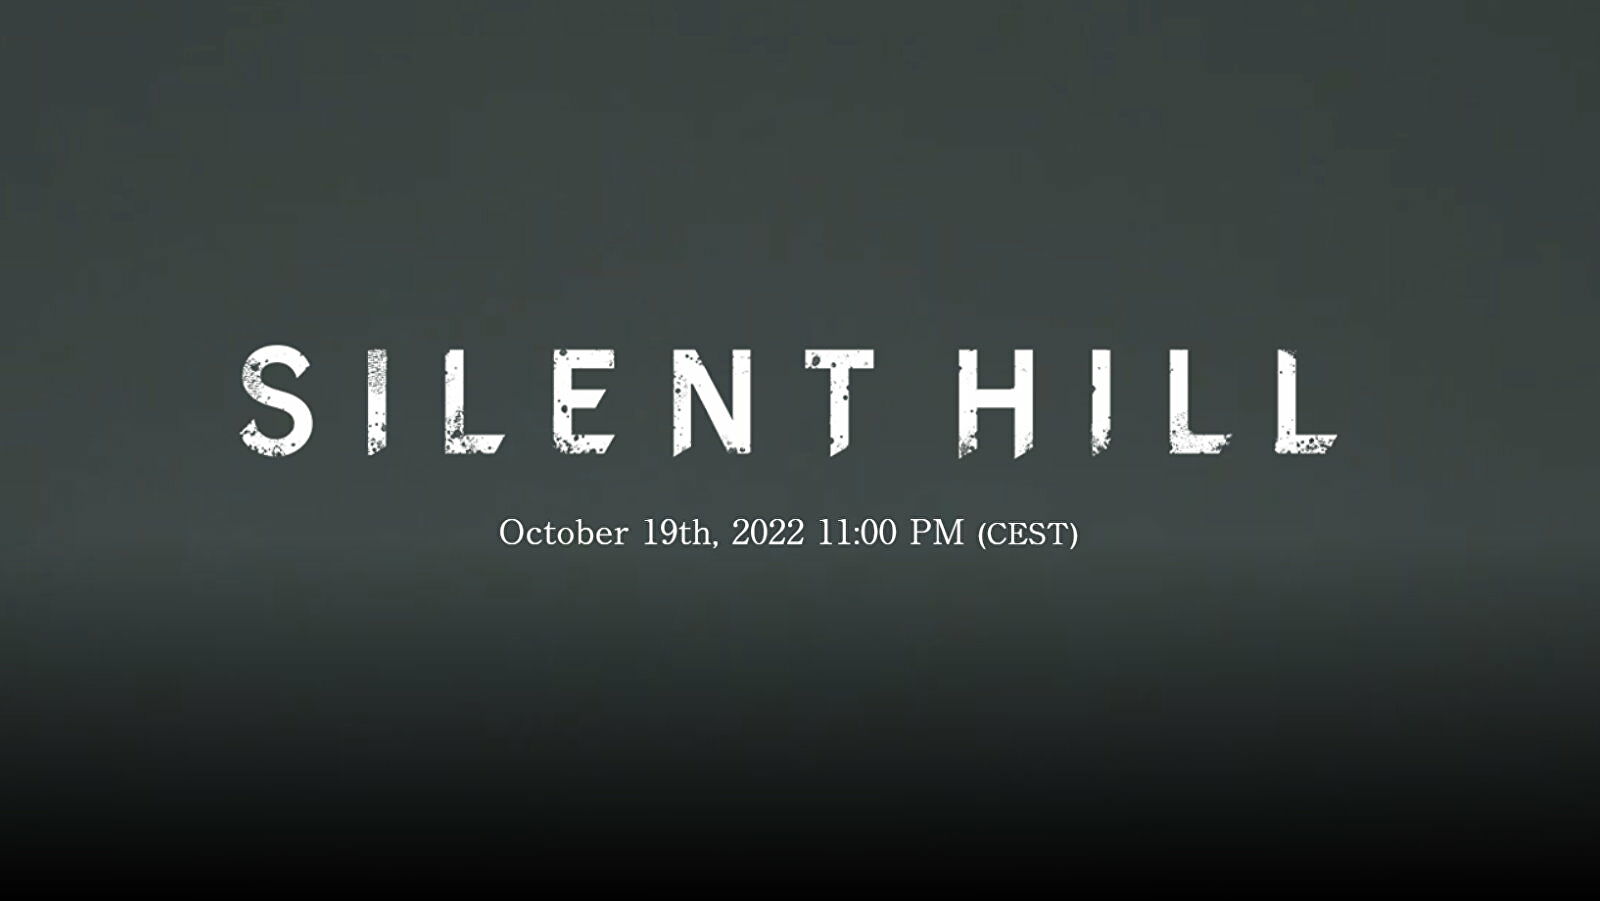 Konami are holding a Silent Hill stream this week